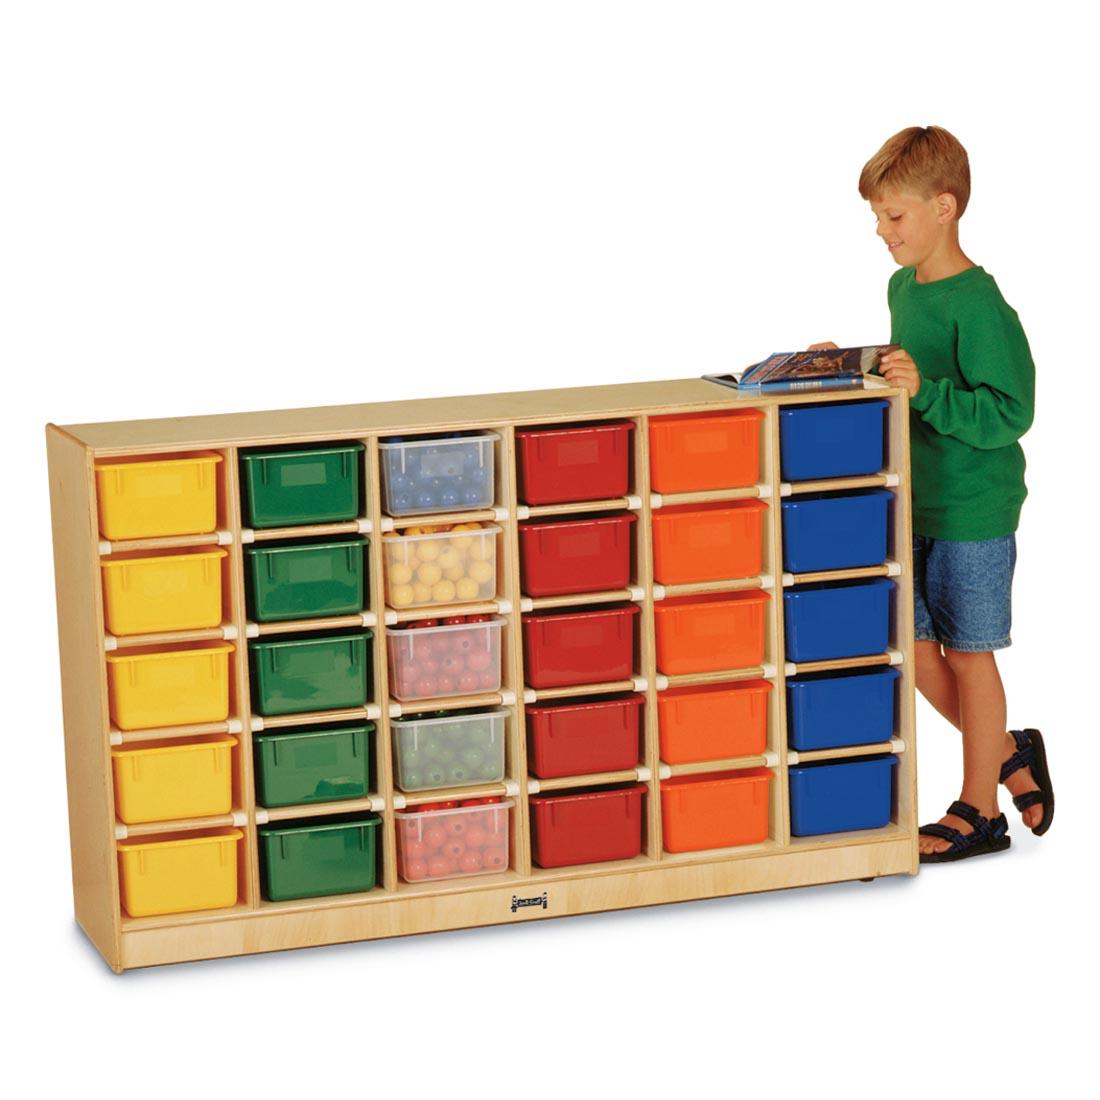 Child reading a book standing next to Mobile Cubbie With 30 Trays